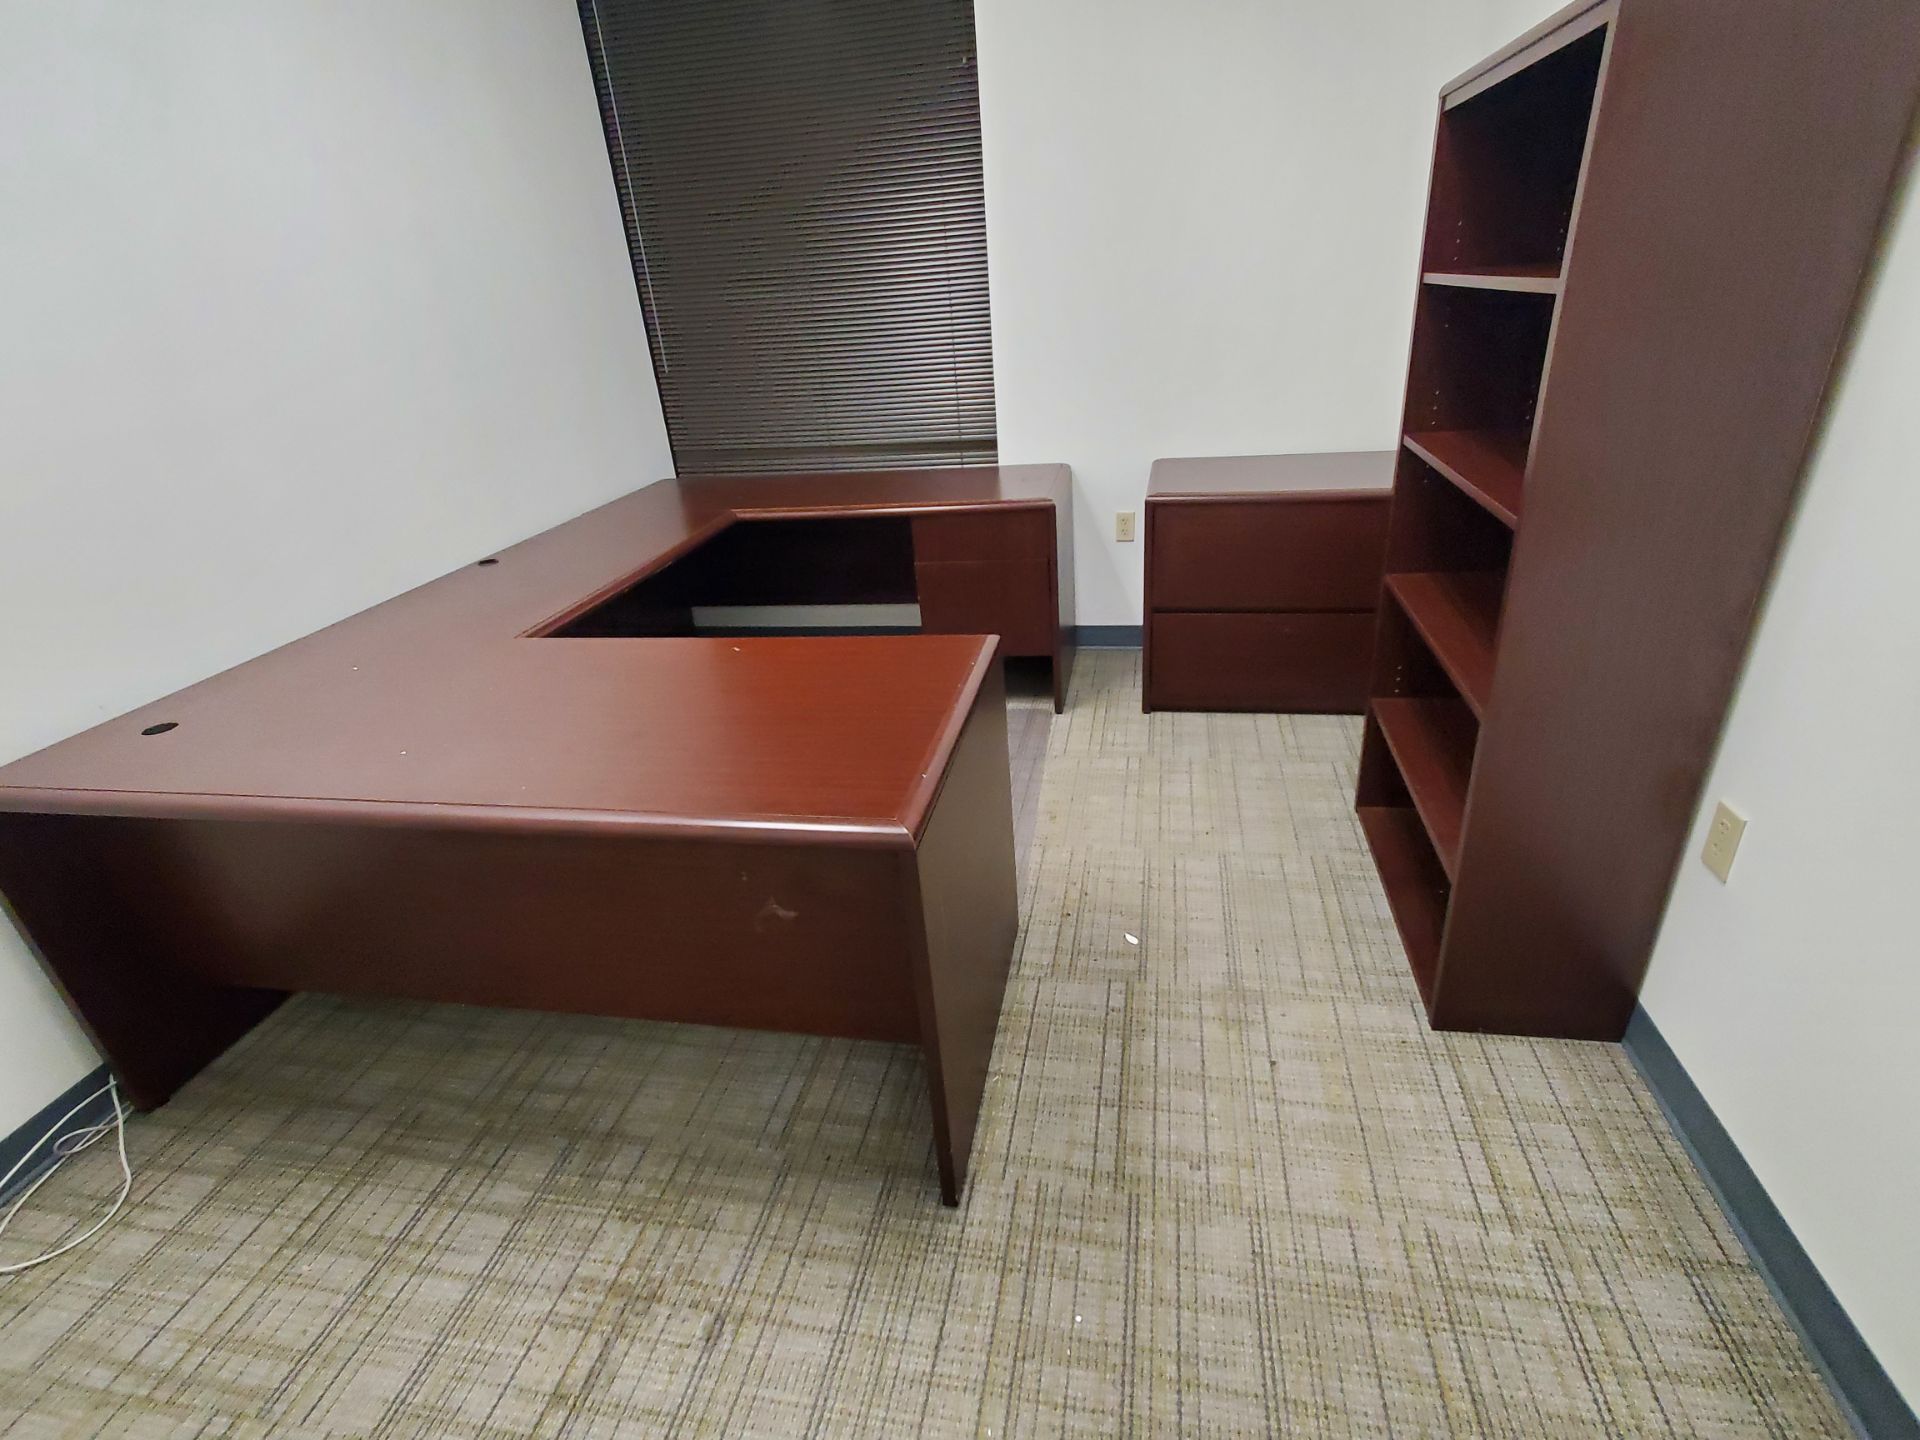 Furniture in Office (No Contents)